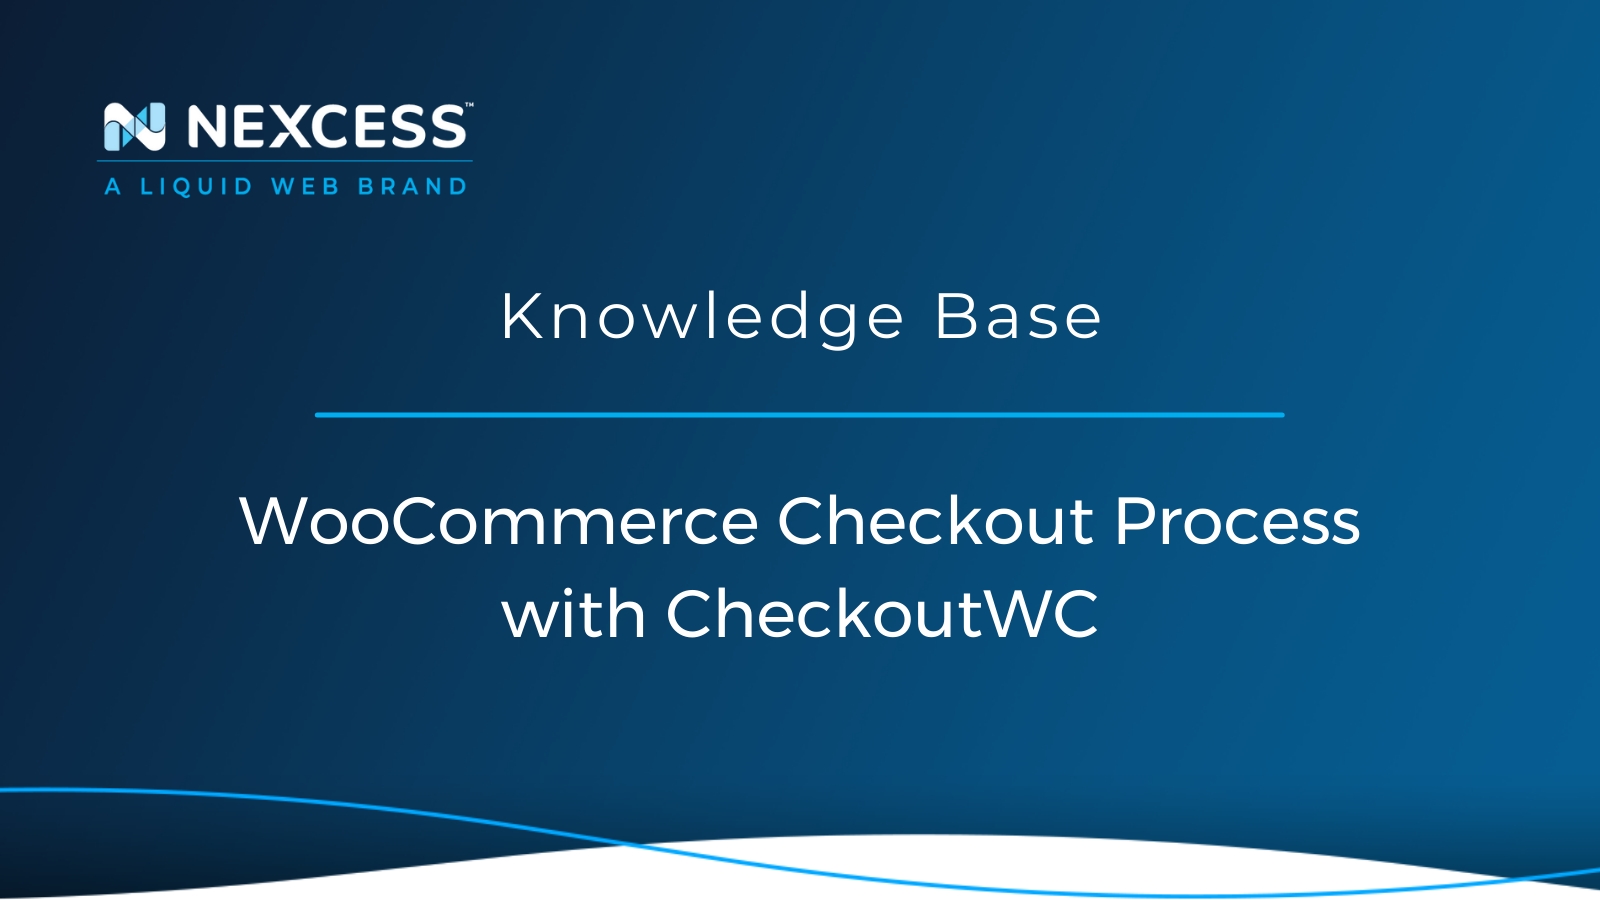 WooCommerce Checkout Process with CheckoutWC